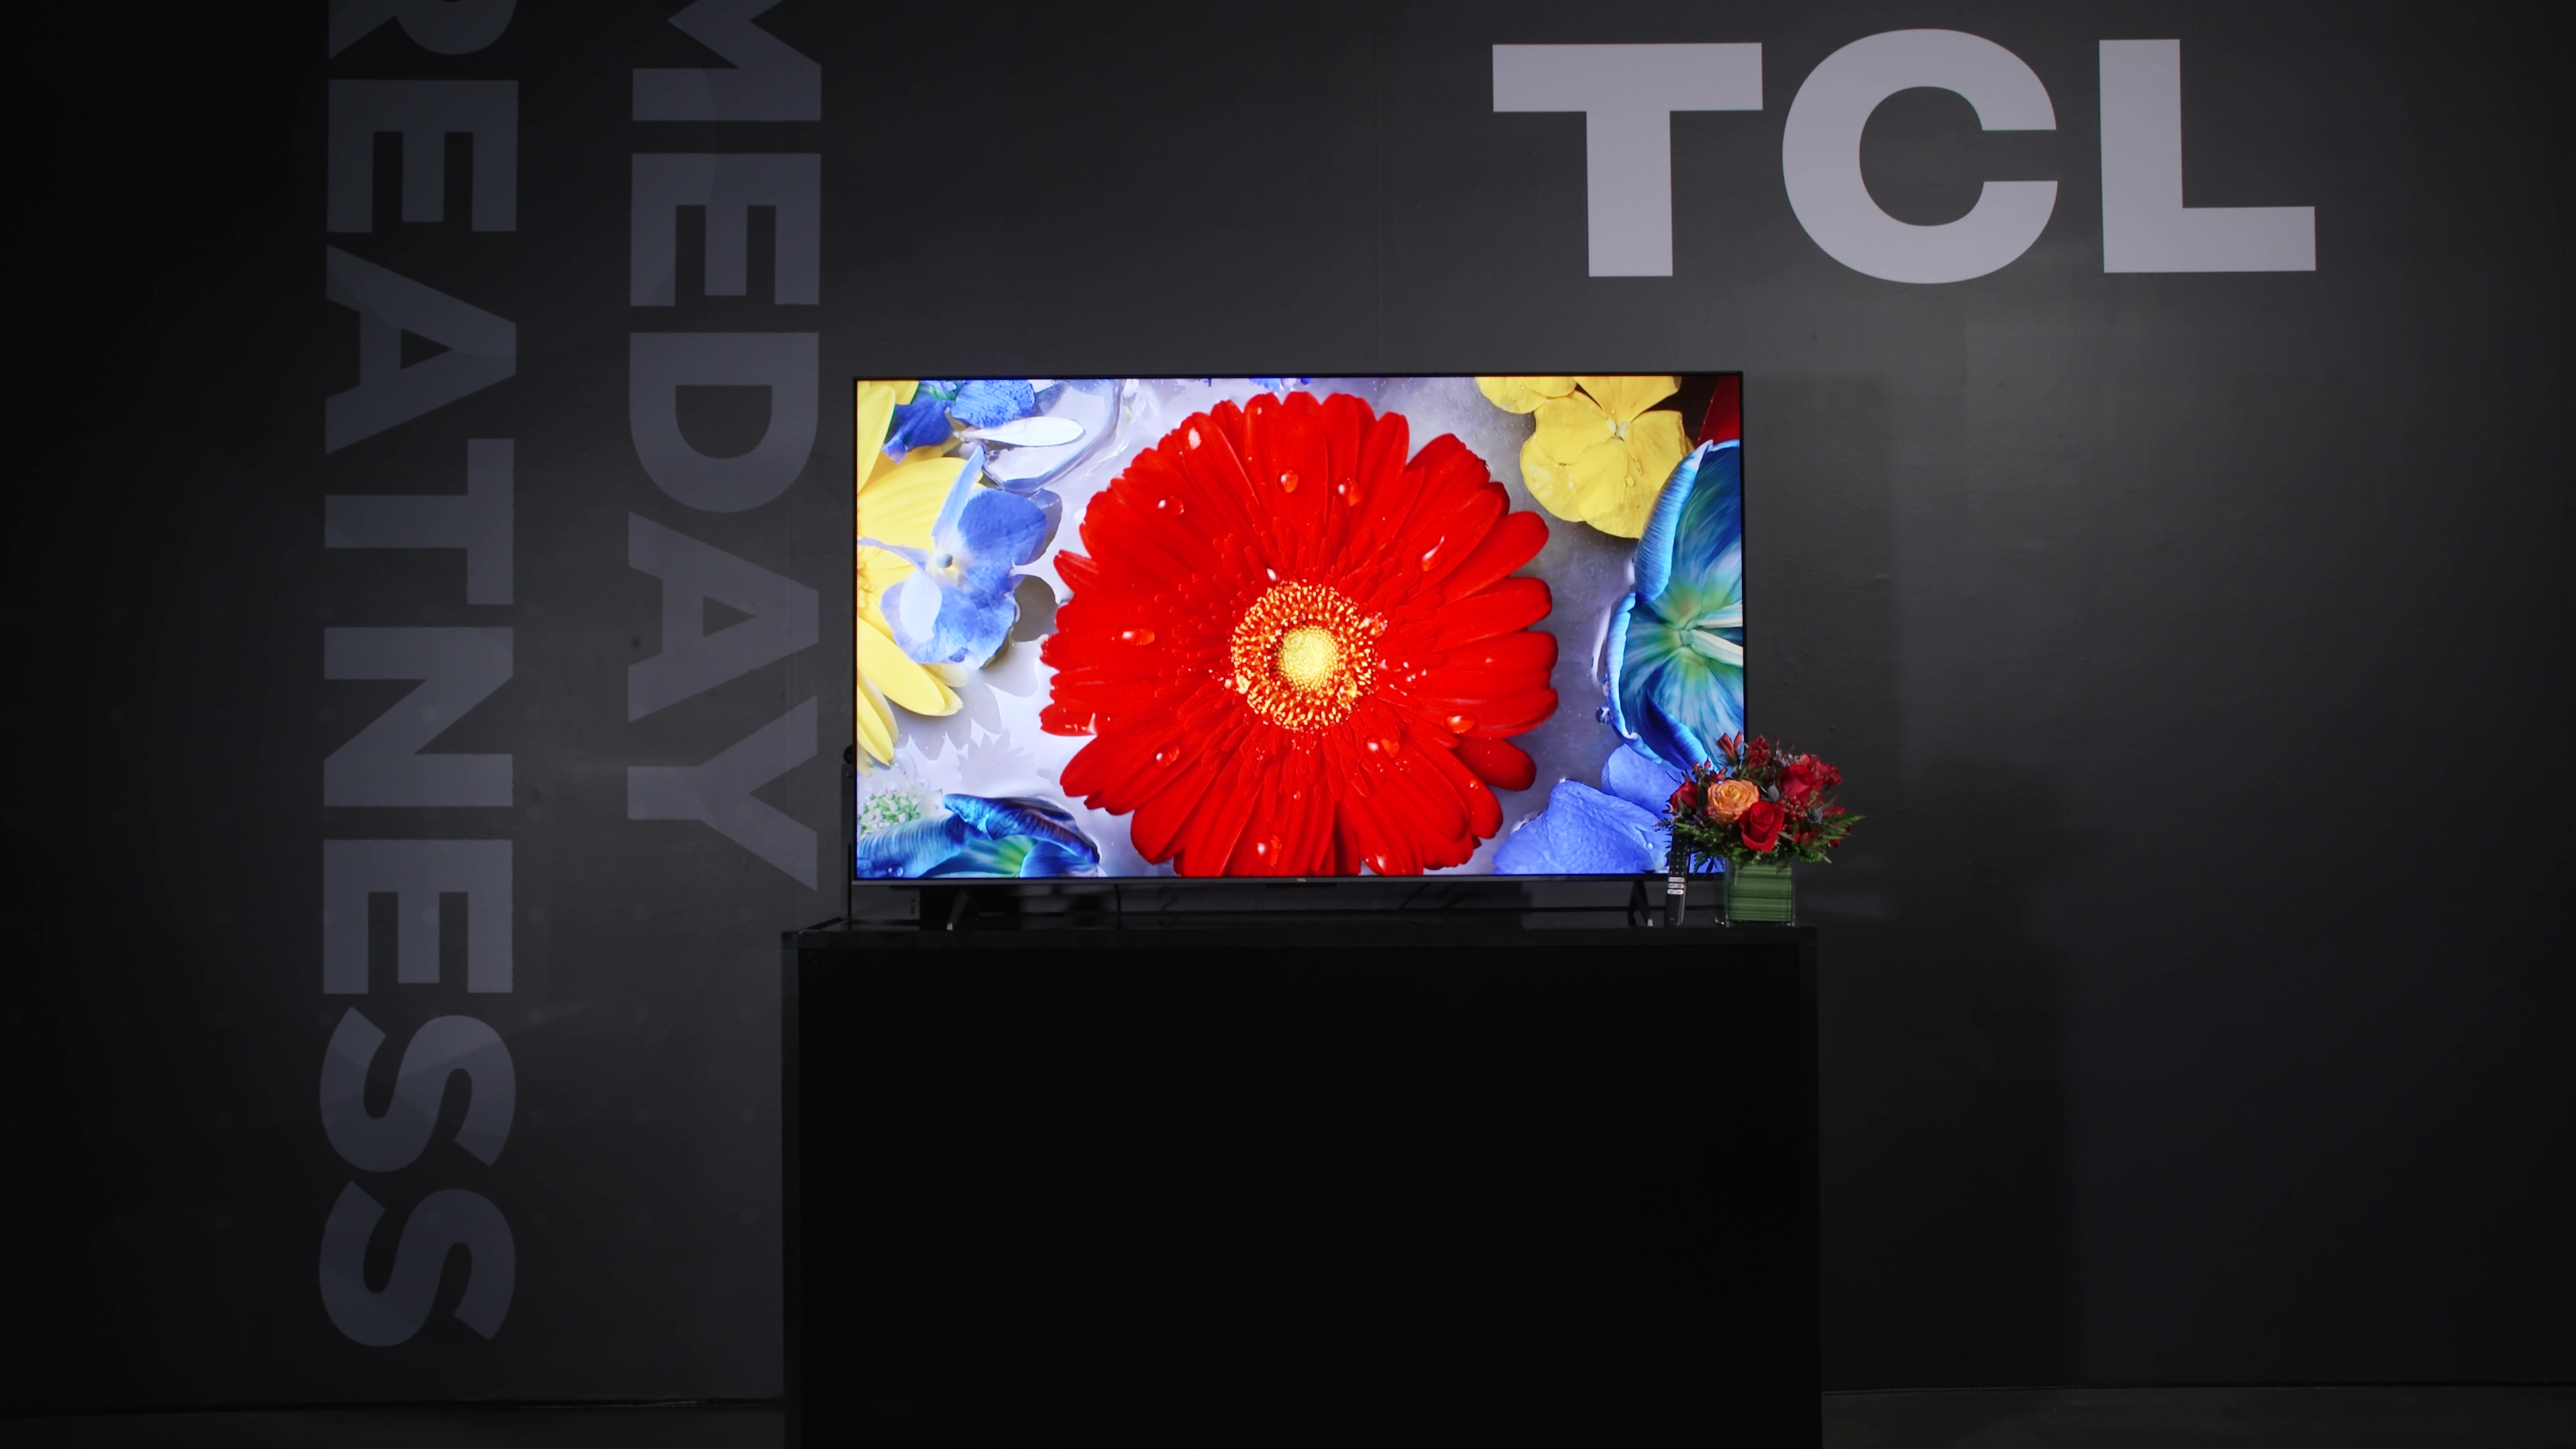 A close up of a red gerbera daisy against other flowers on a TCL QM8 Mini-LED TV.